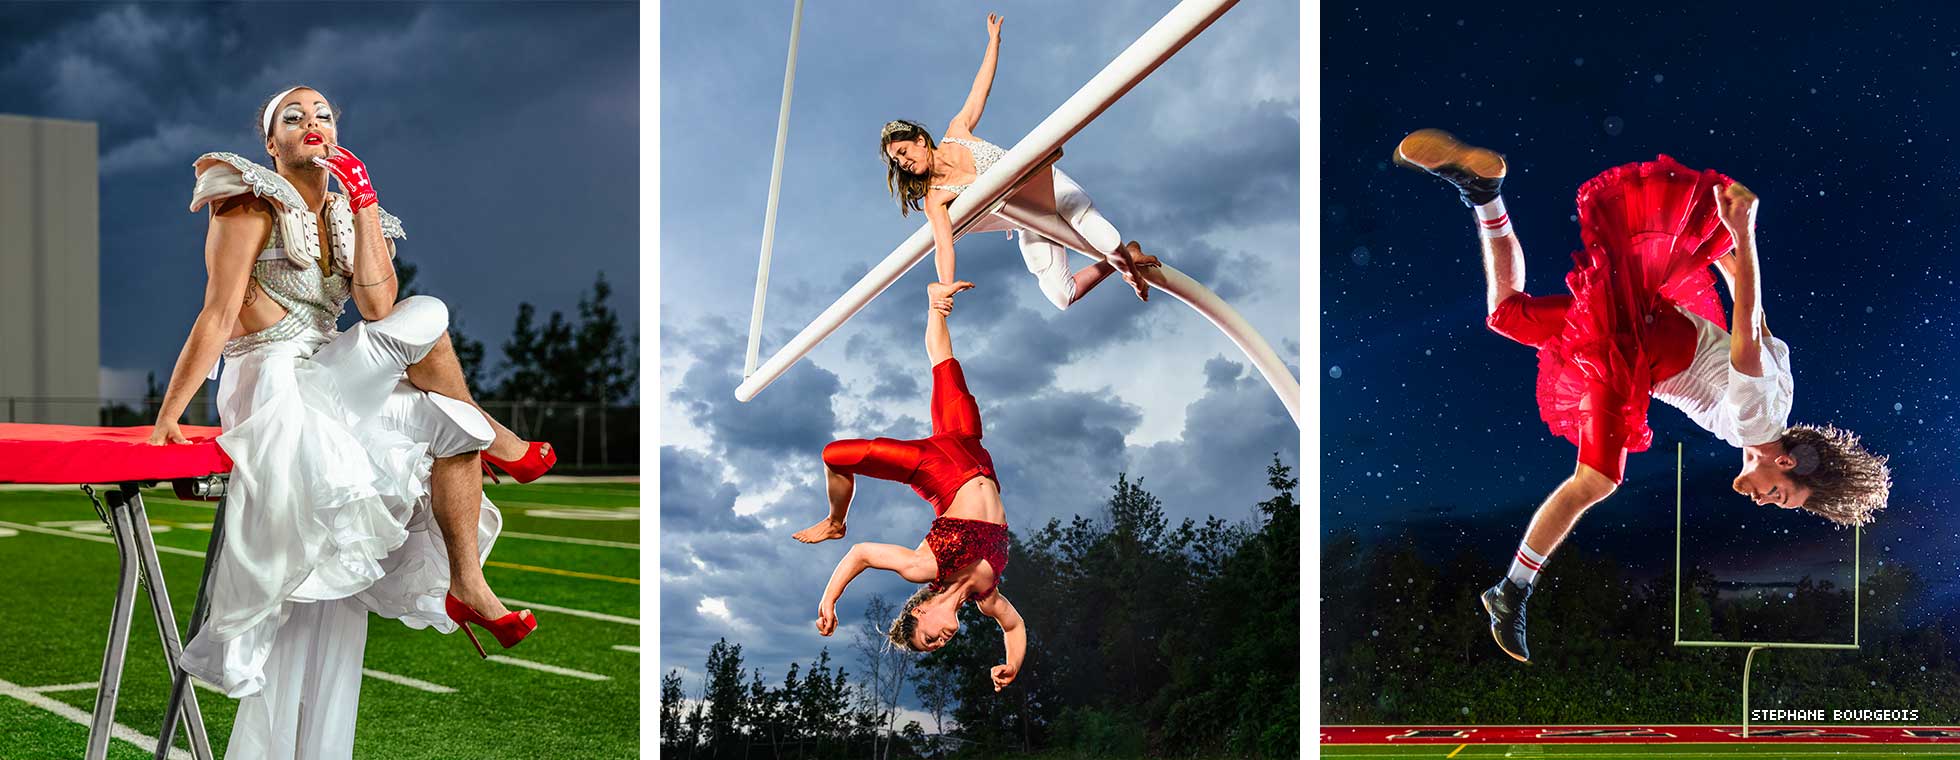 In an image collage, a person wears heels, a dress, and football chest pads; two acrobats assist each other over a goal post; and an acrobat does an aerial flip with a goalpost in the distance.